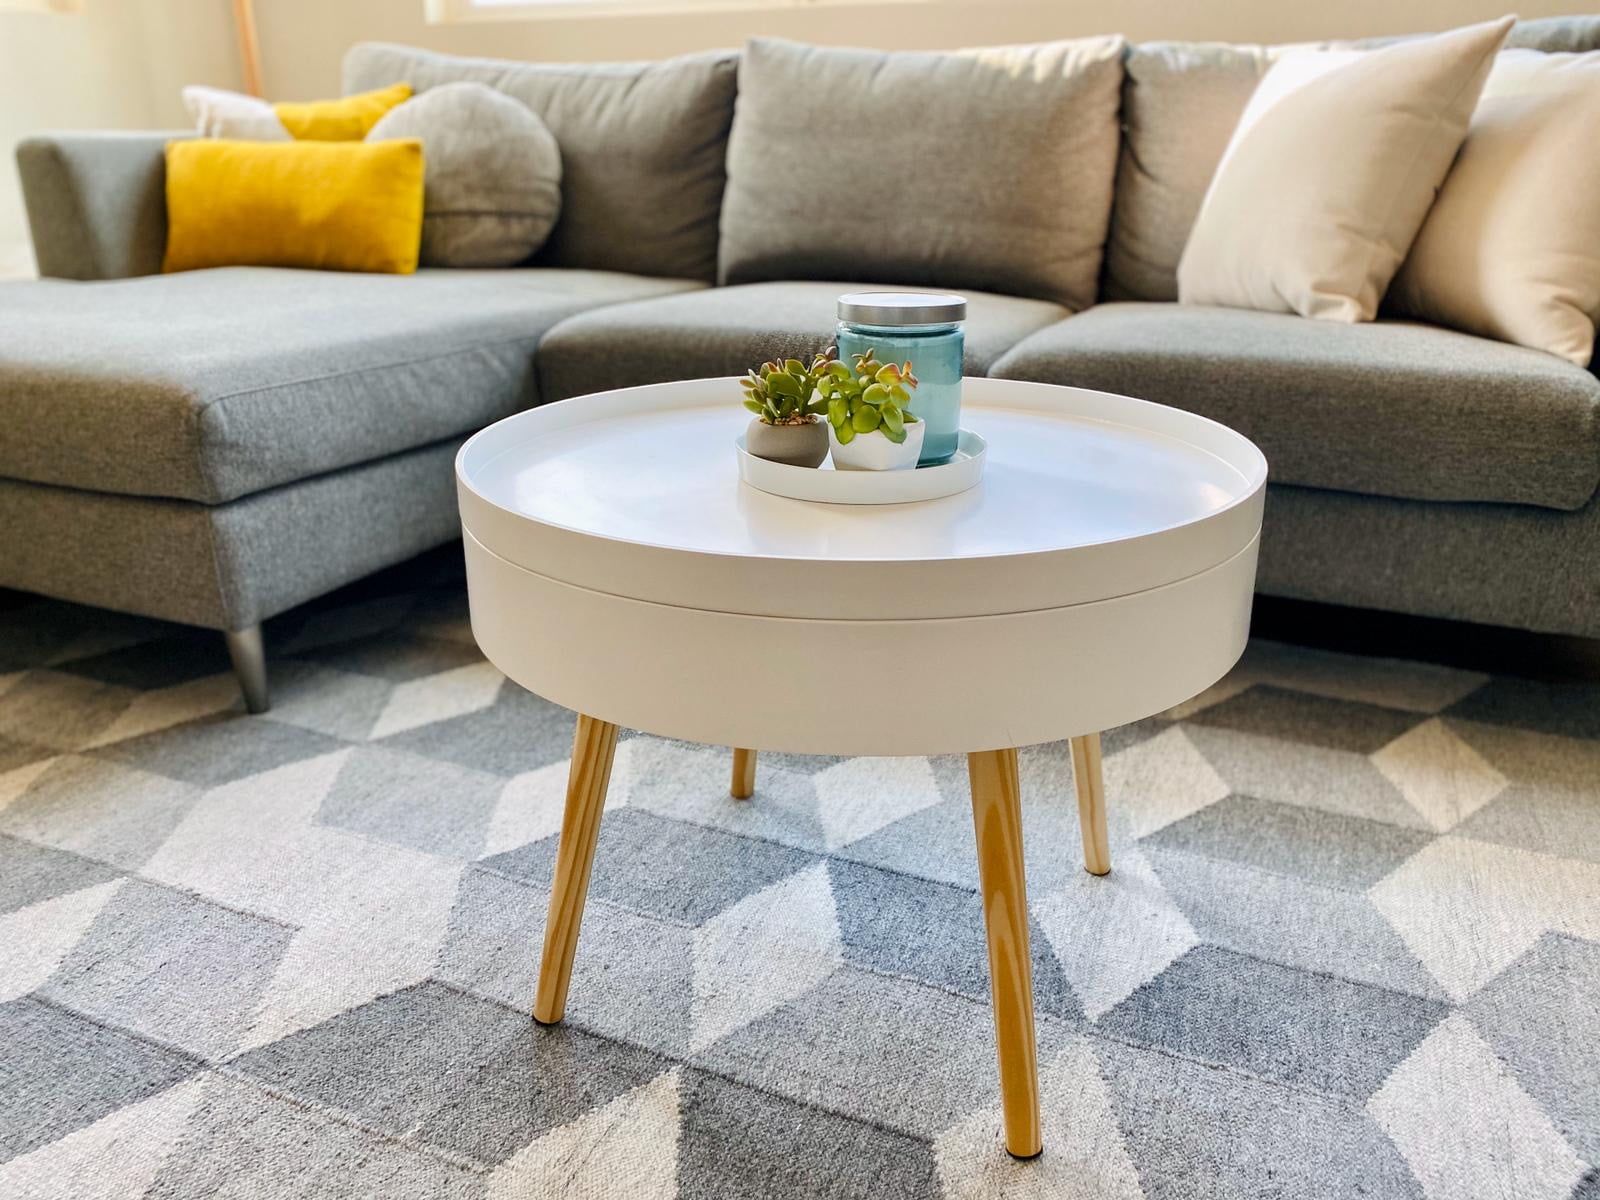 The Simple Project Zoe Mid Century Wood With Storage Round Coffee Table Inside Round Coffee Tables With Storage (View 6 of 20)